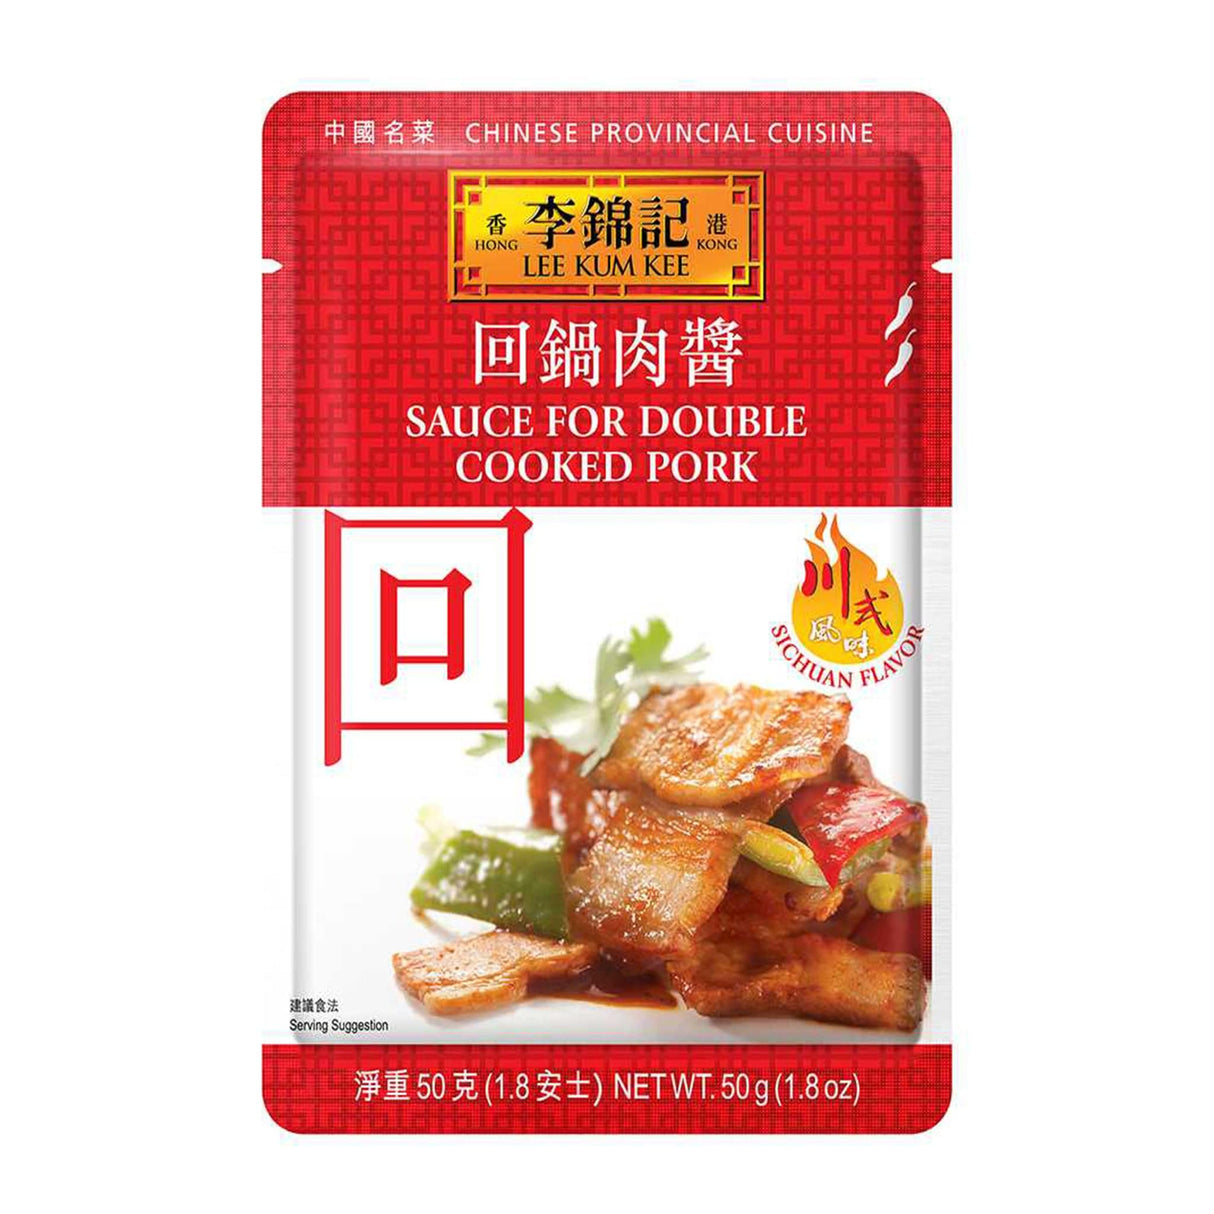 Lee Kum Kee Sauce For Double Cooked Pork